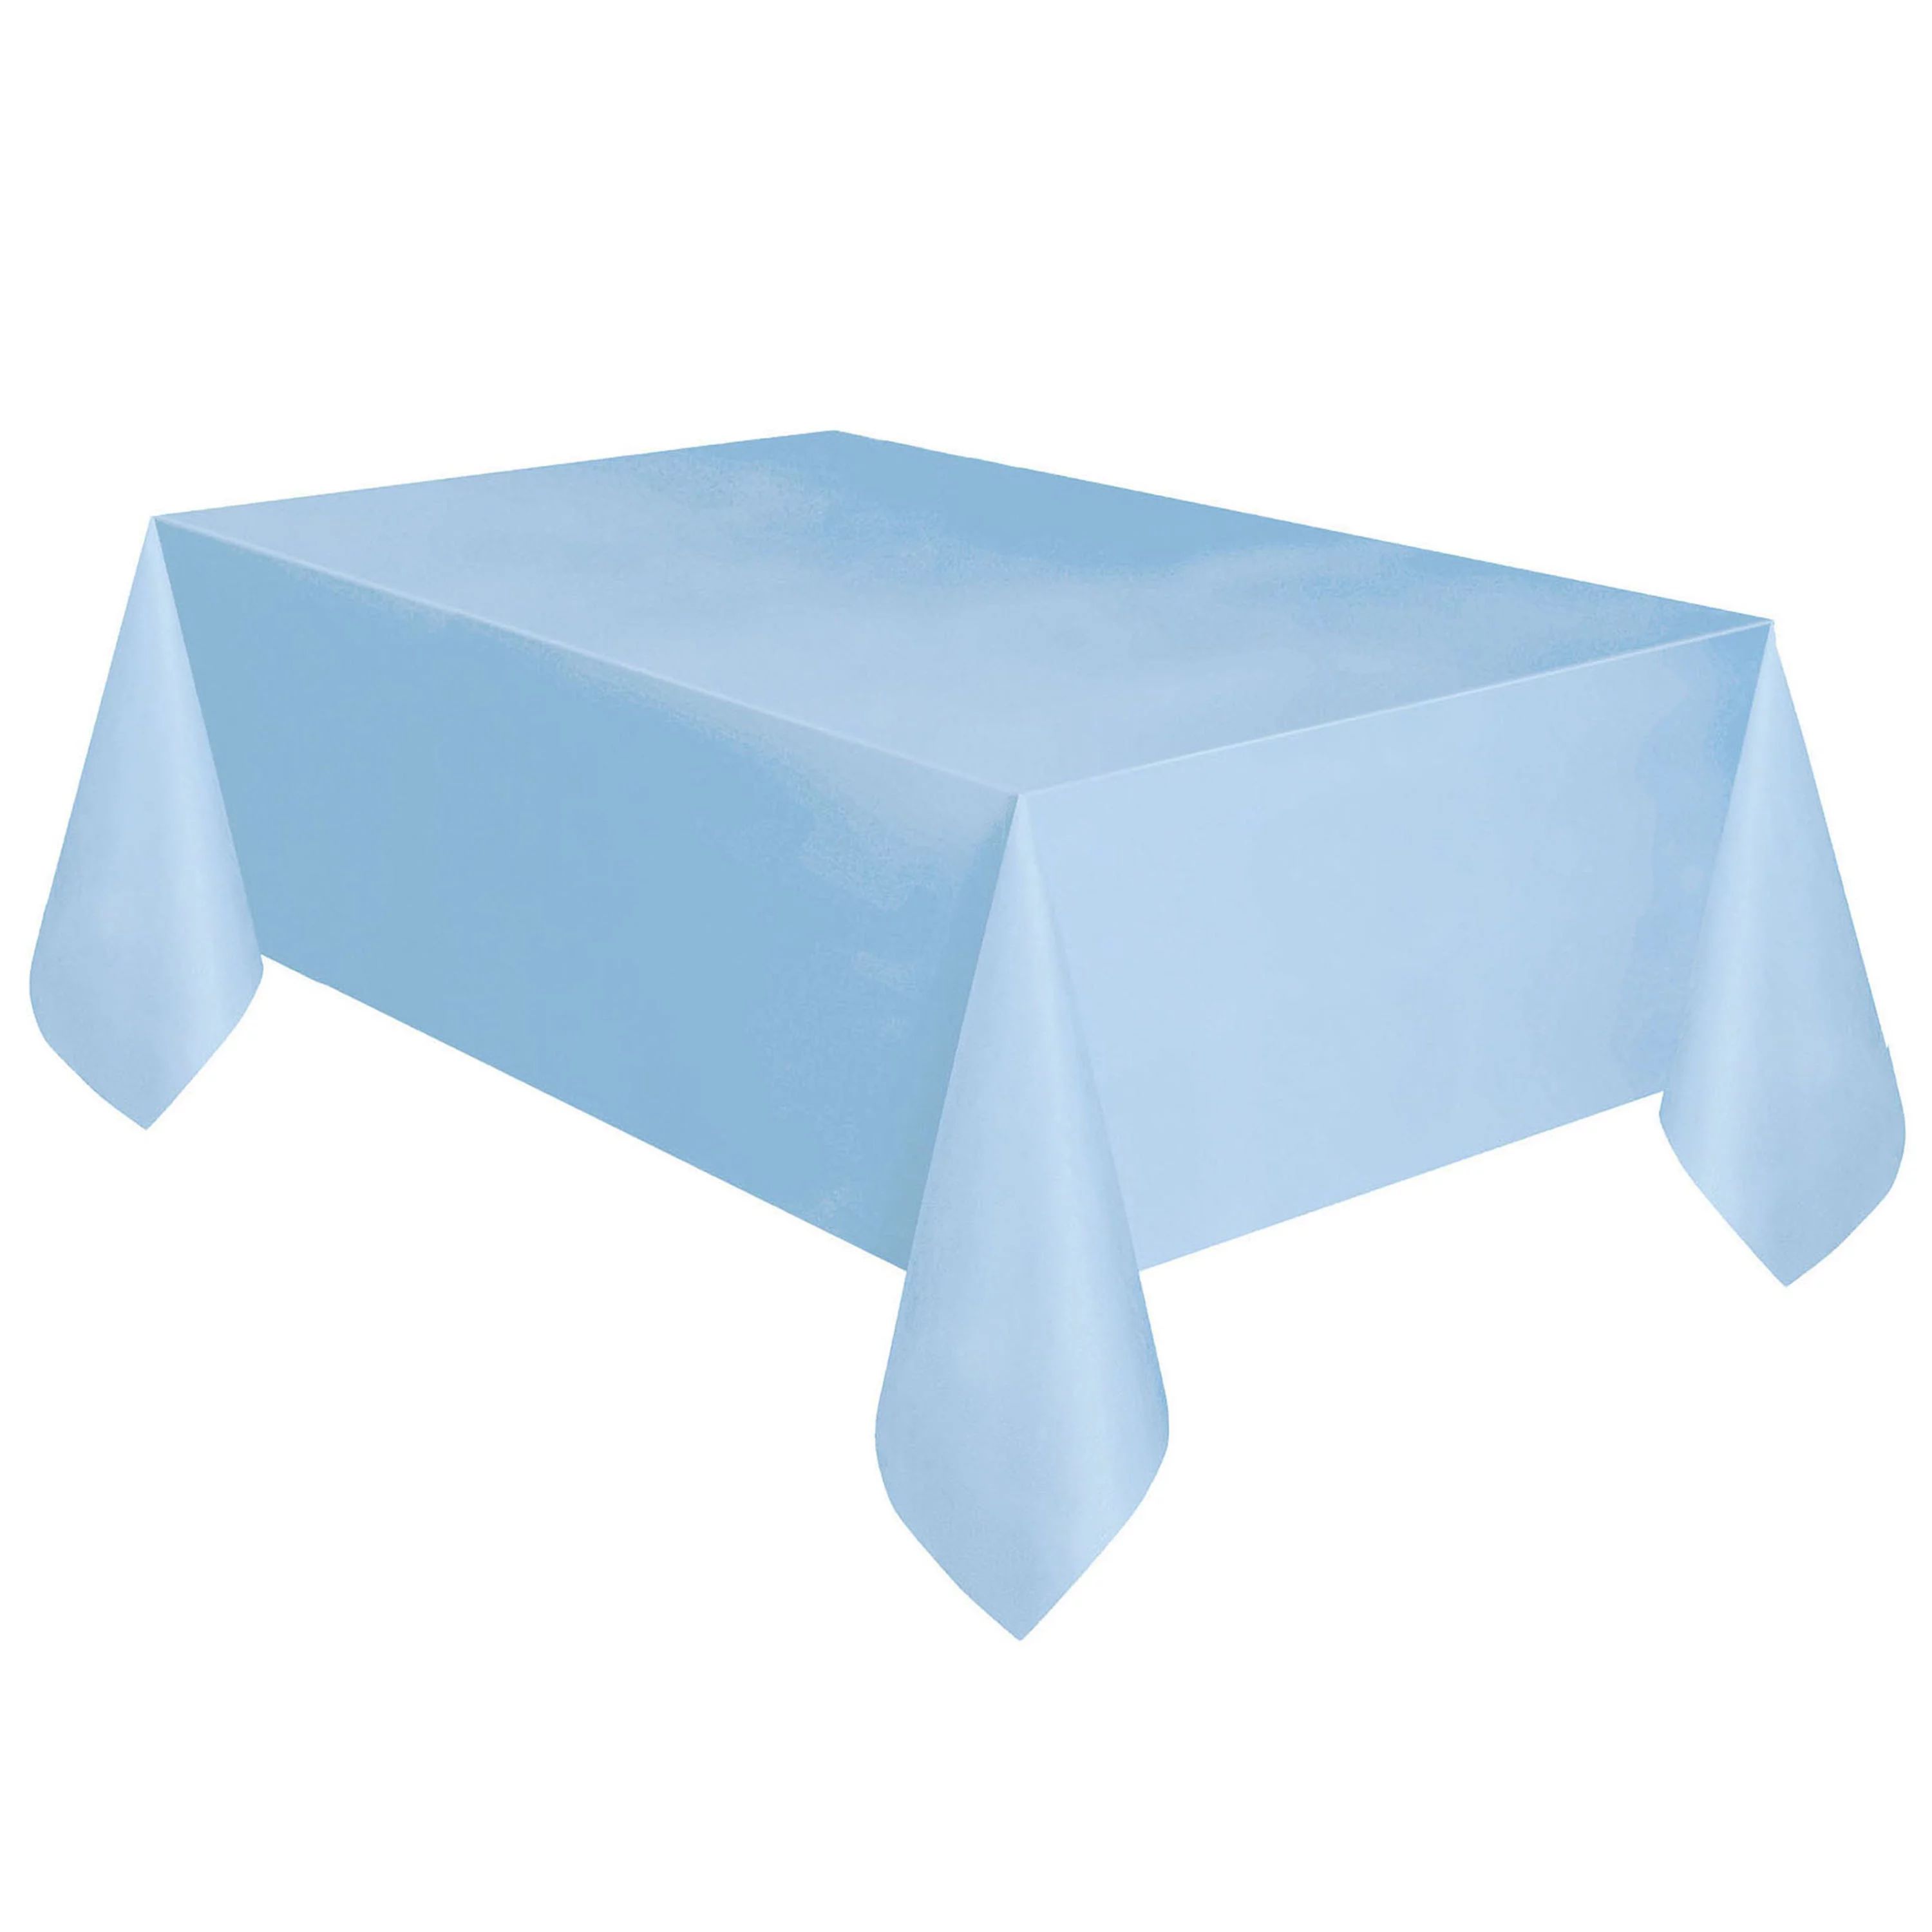 Way to Celebrate! Light Blue Plastic Party Tablecloth, 108in x 54in | Walmart (US)